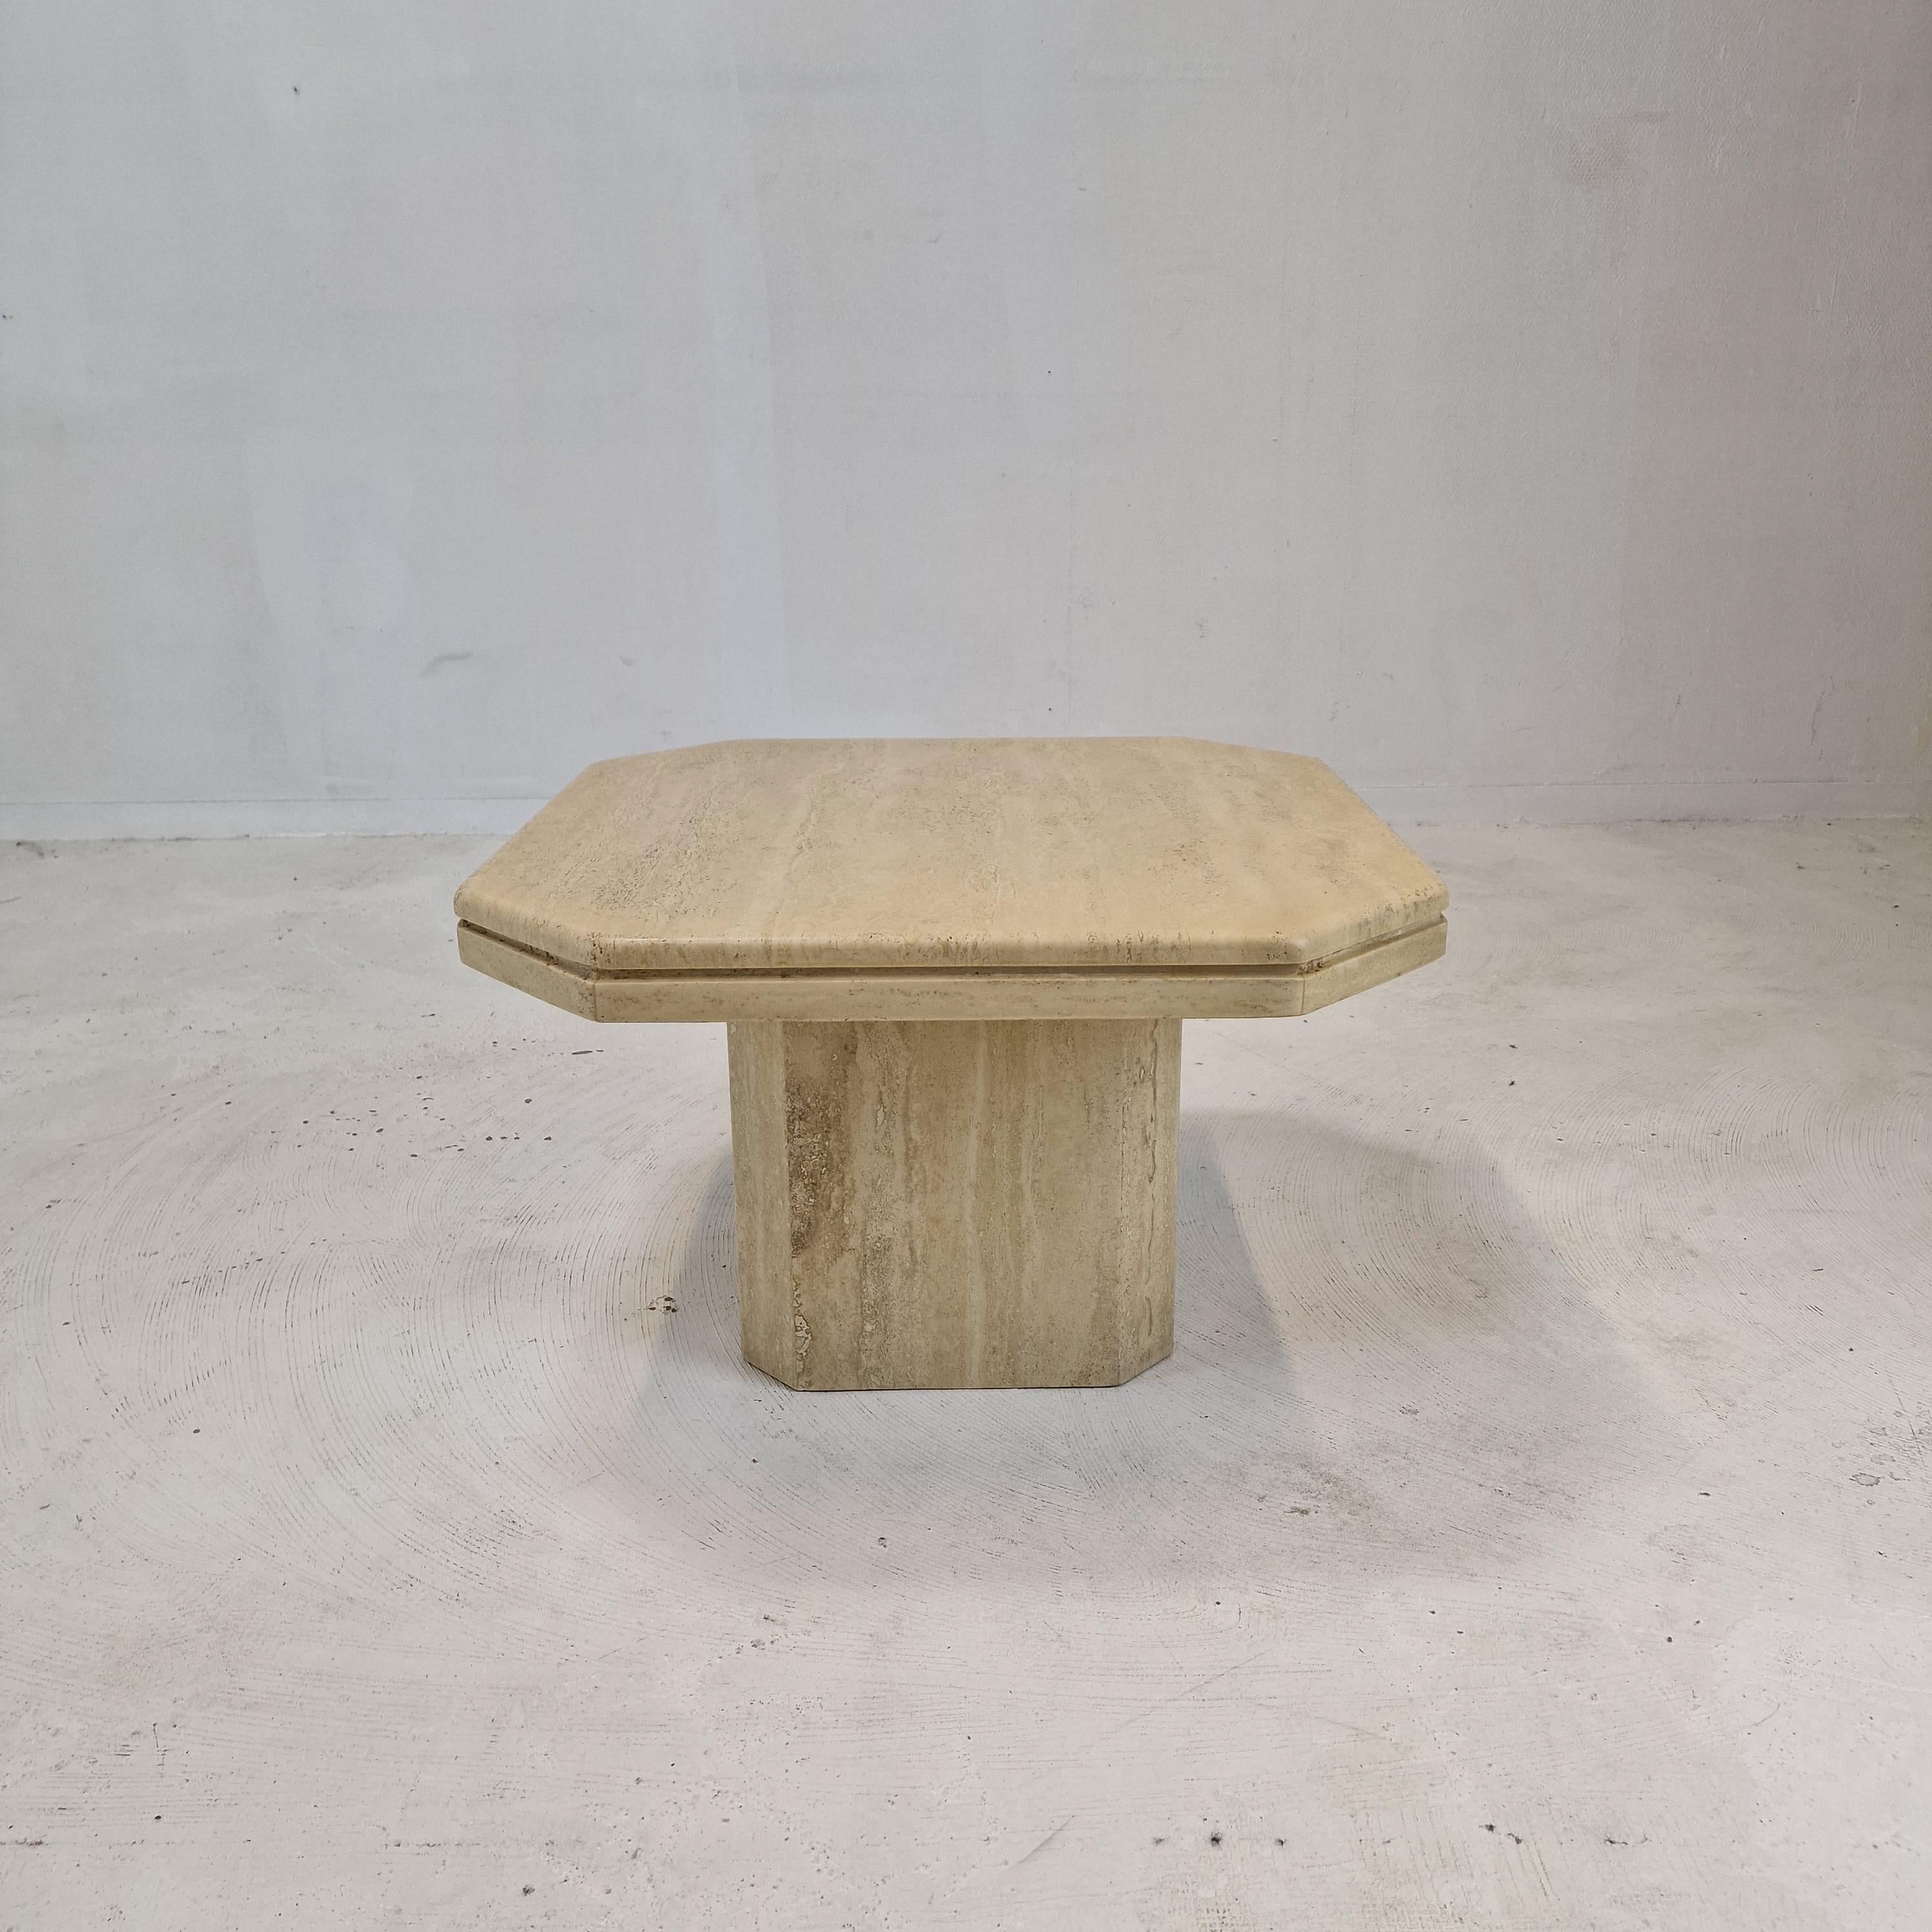 Very nice Italian coffee or side table handcrafted out of travertine, 1980's.

The top is rounded on the edge. 
It is made of beautiful travertine.
Please take notice of the very nice patterns.

It has the normal traces of use, see the